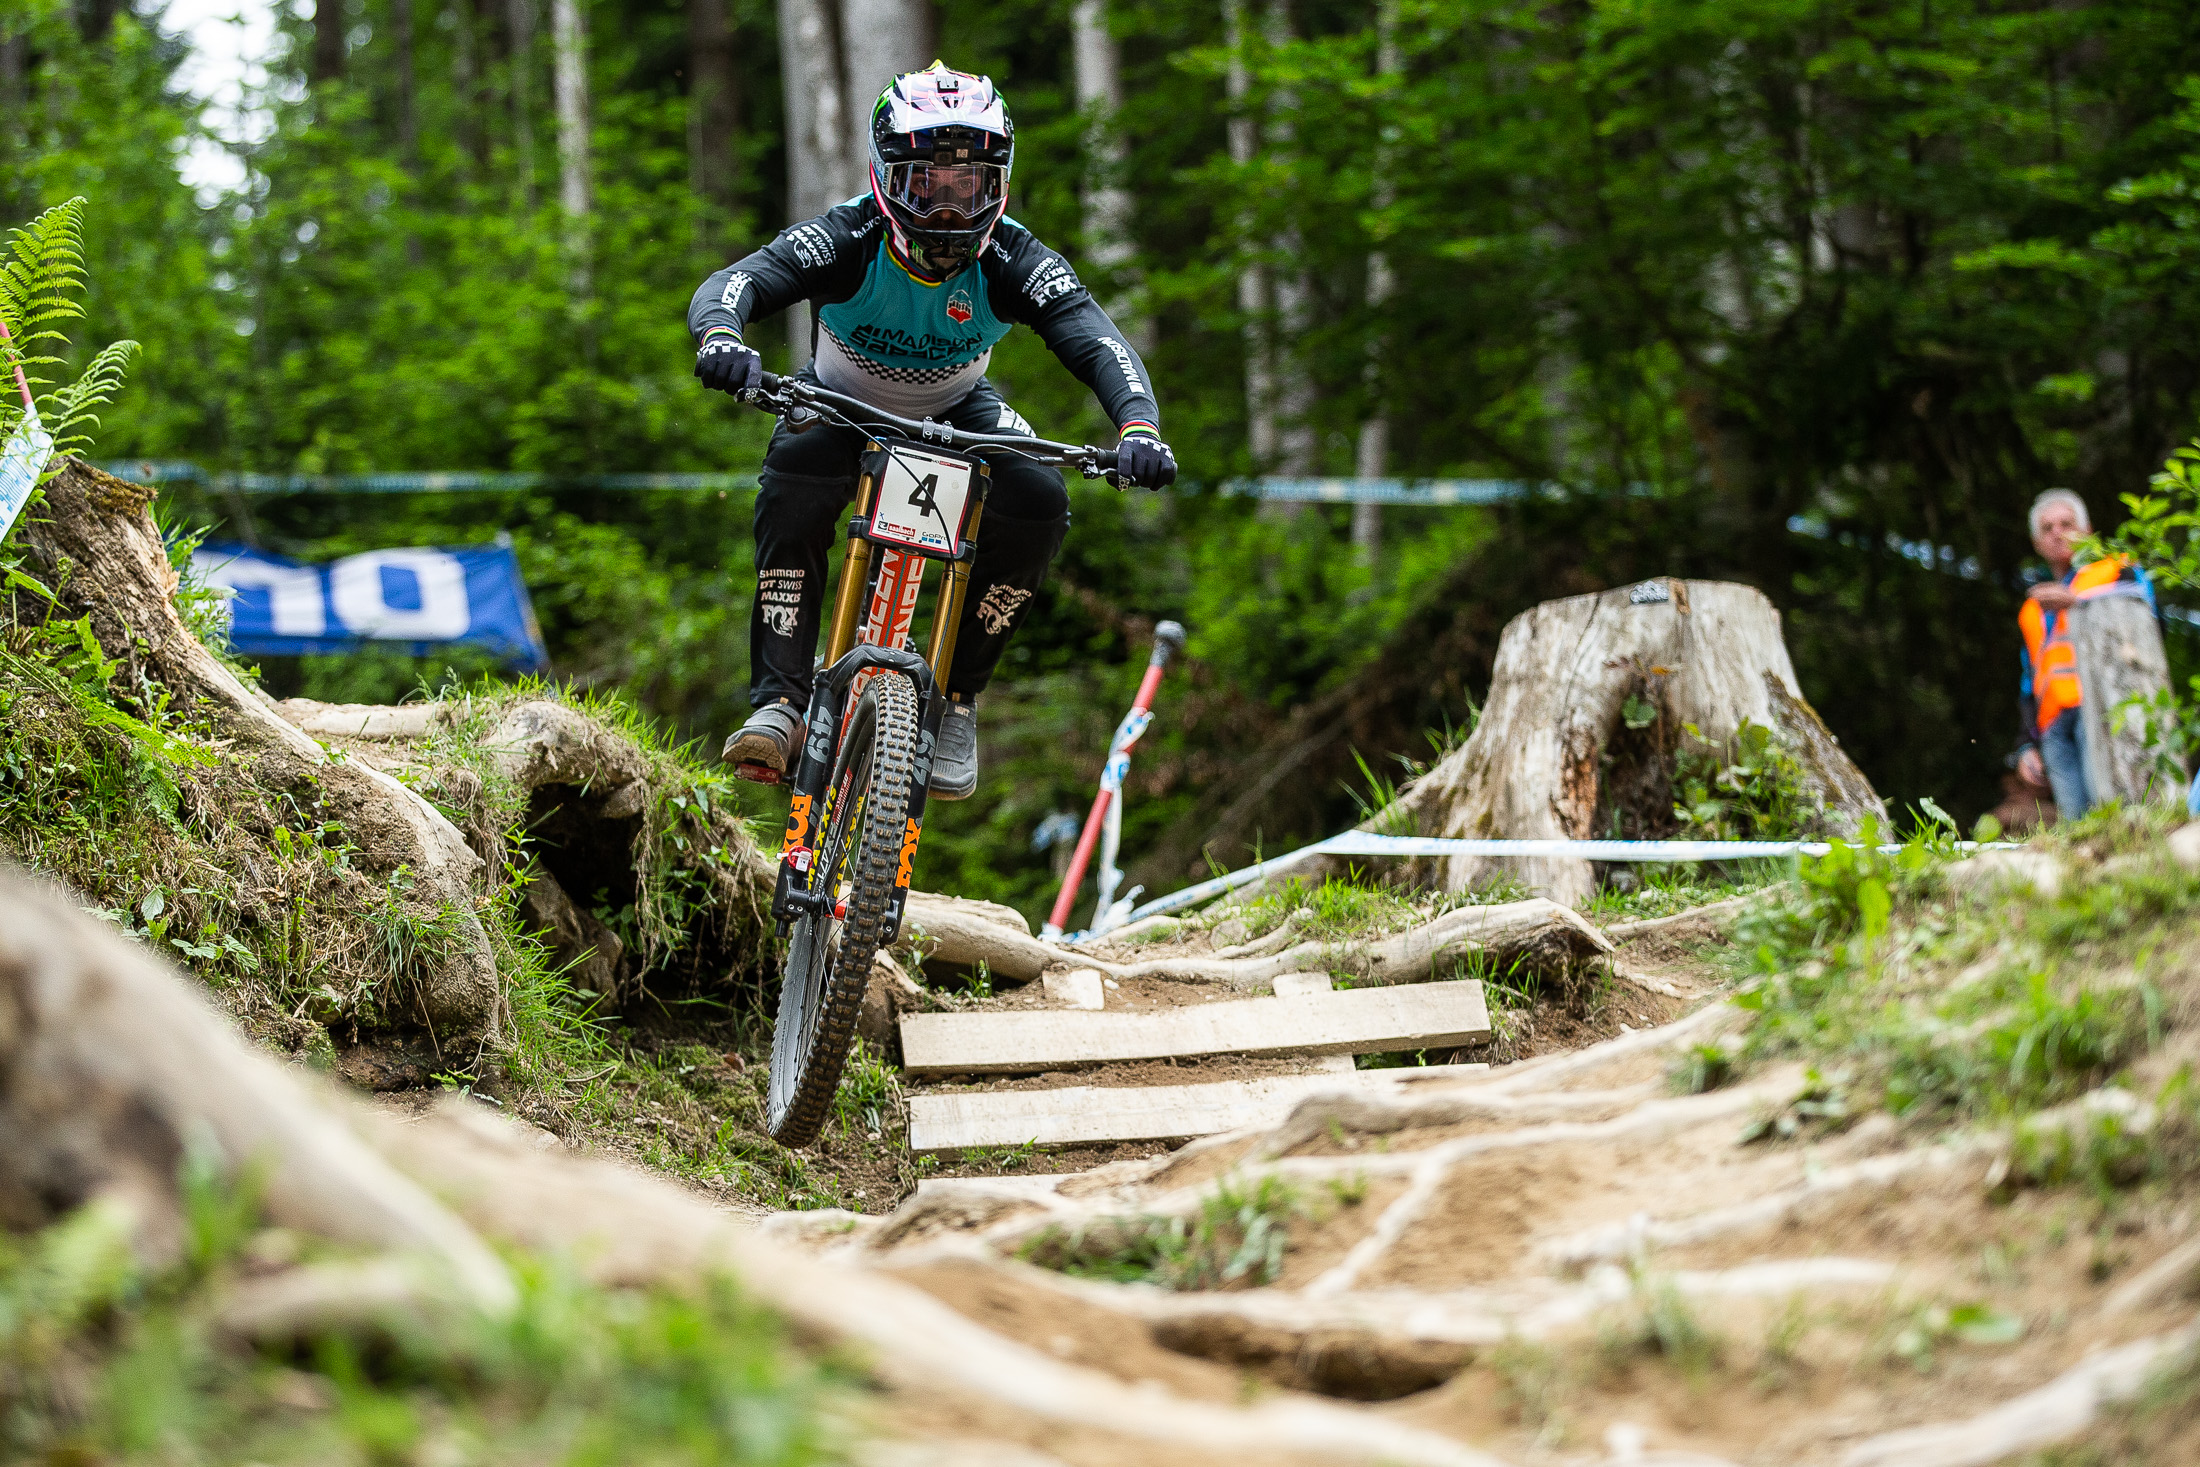 Monster Energy's Danny Hart Takes Fourth Place at the World Cup in Leogang, Austria and Sits in Fourth Place Overall